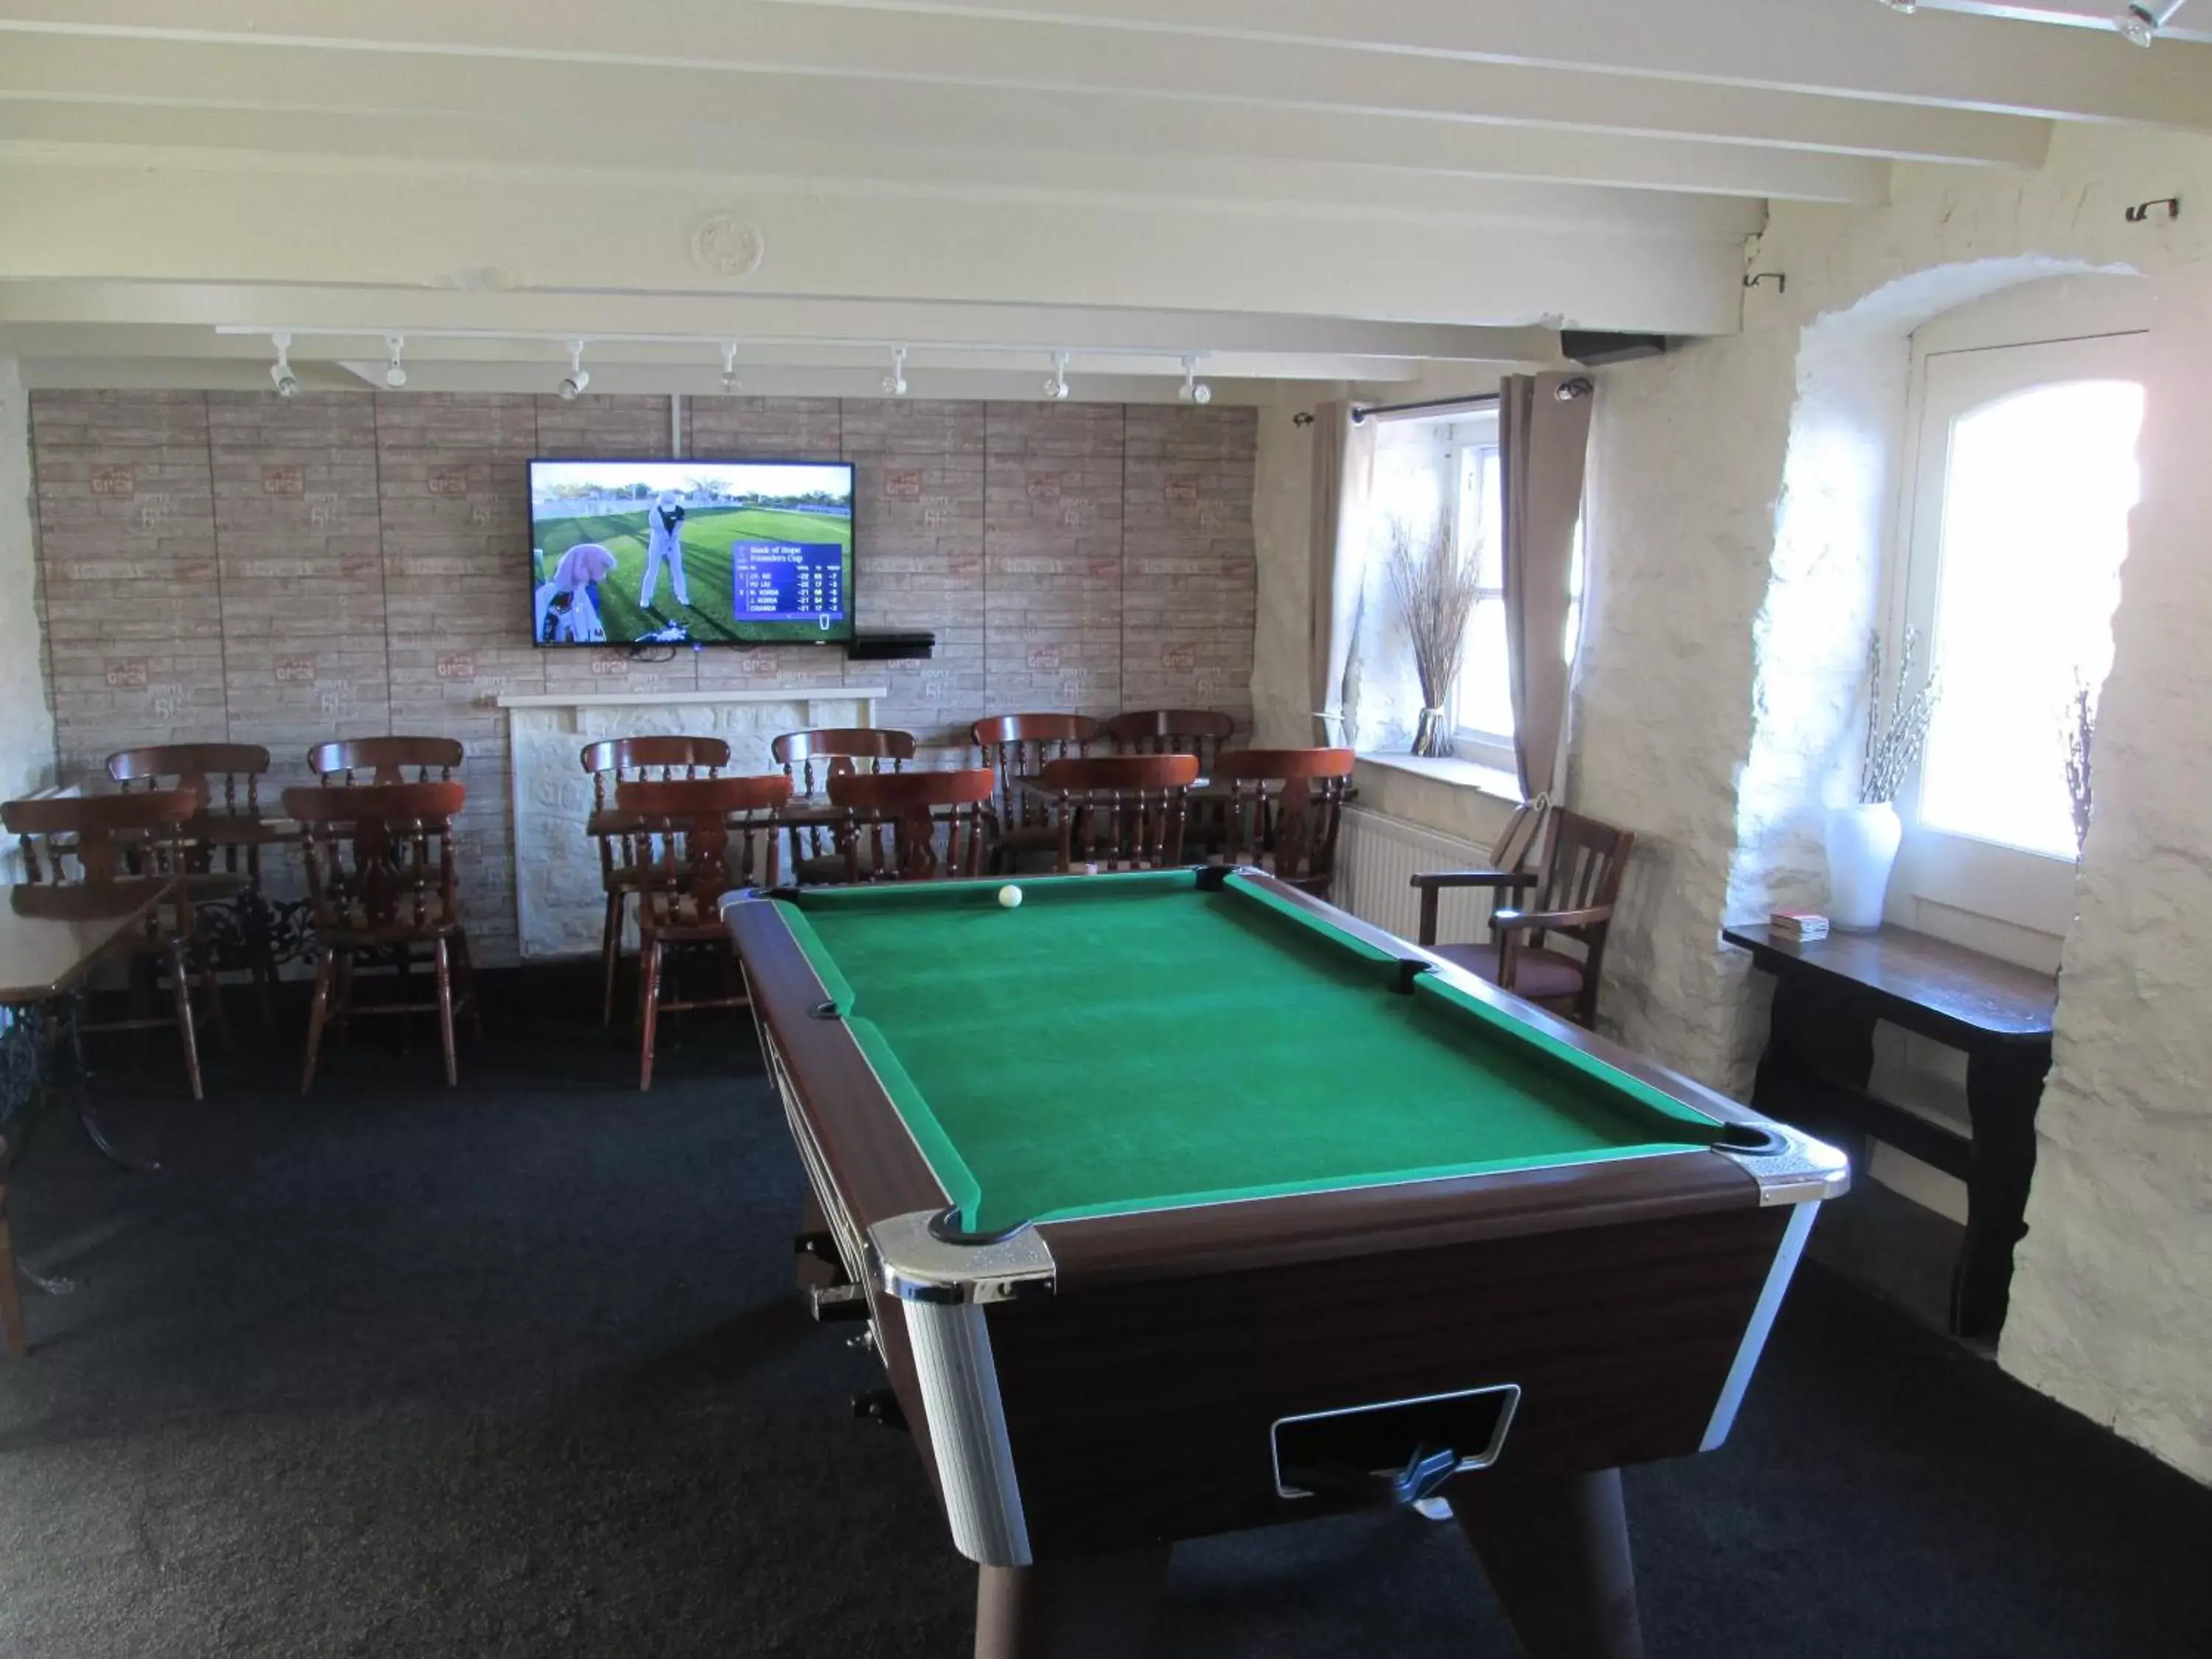 Billiards in Wentworth arms